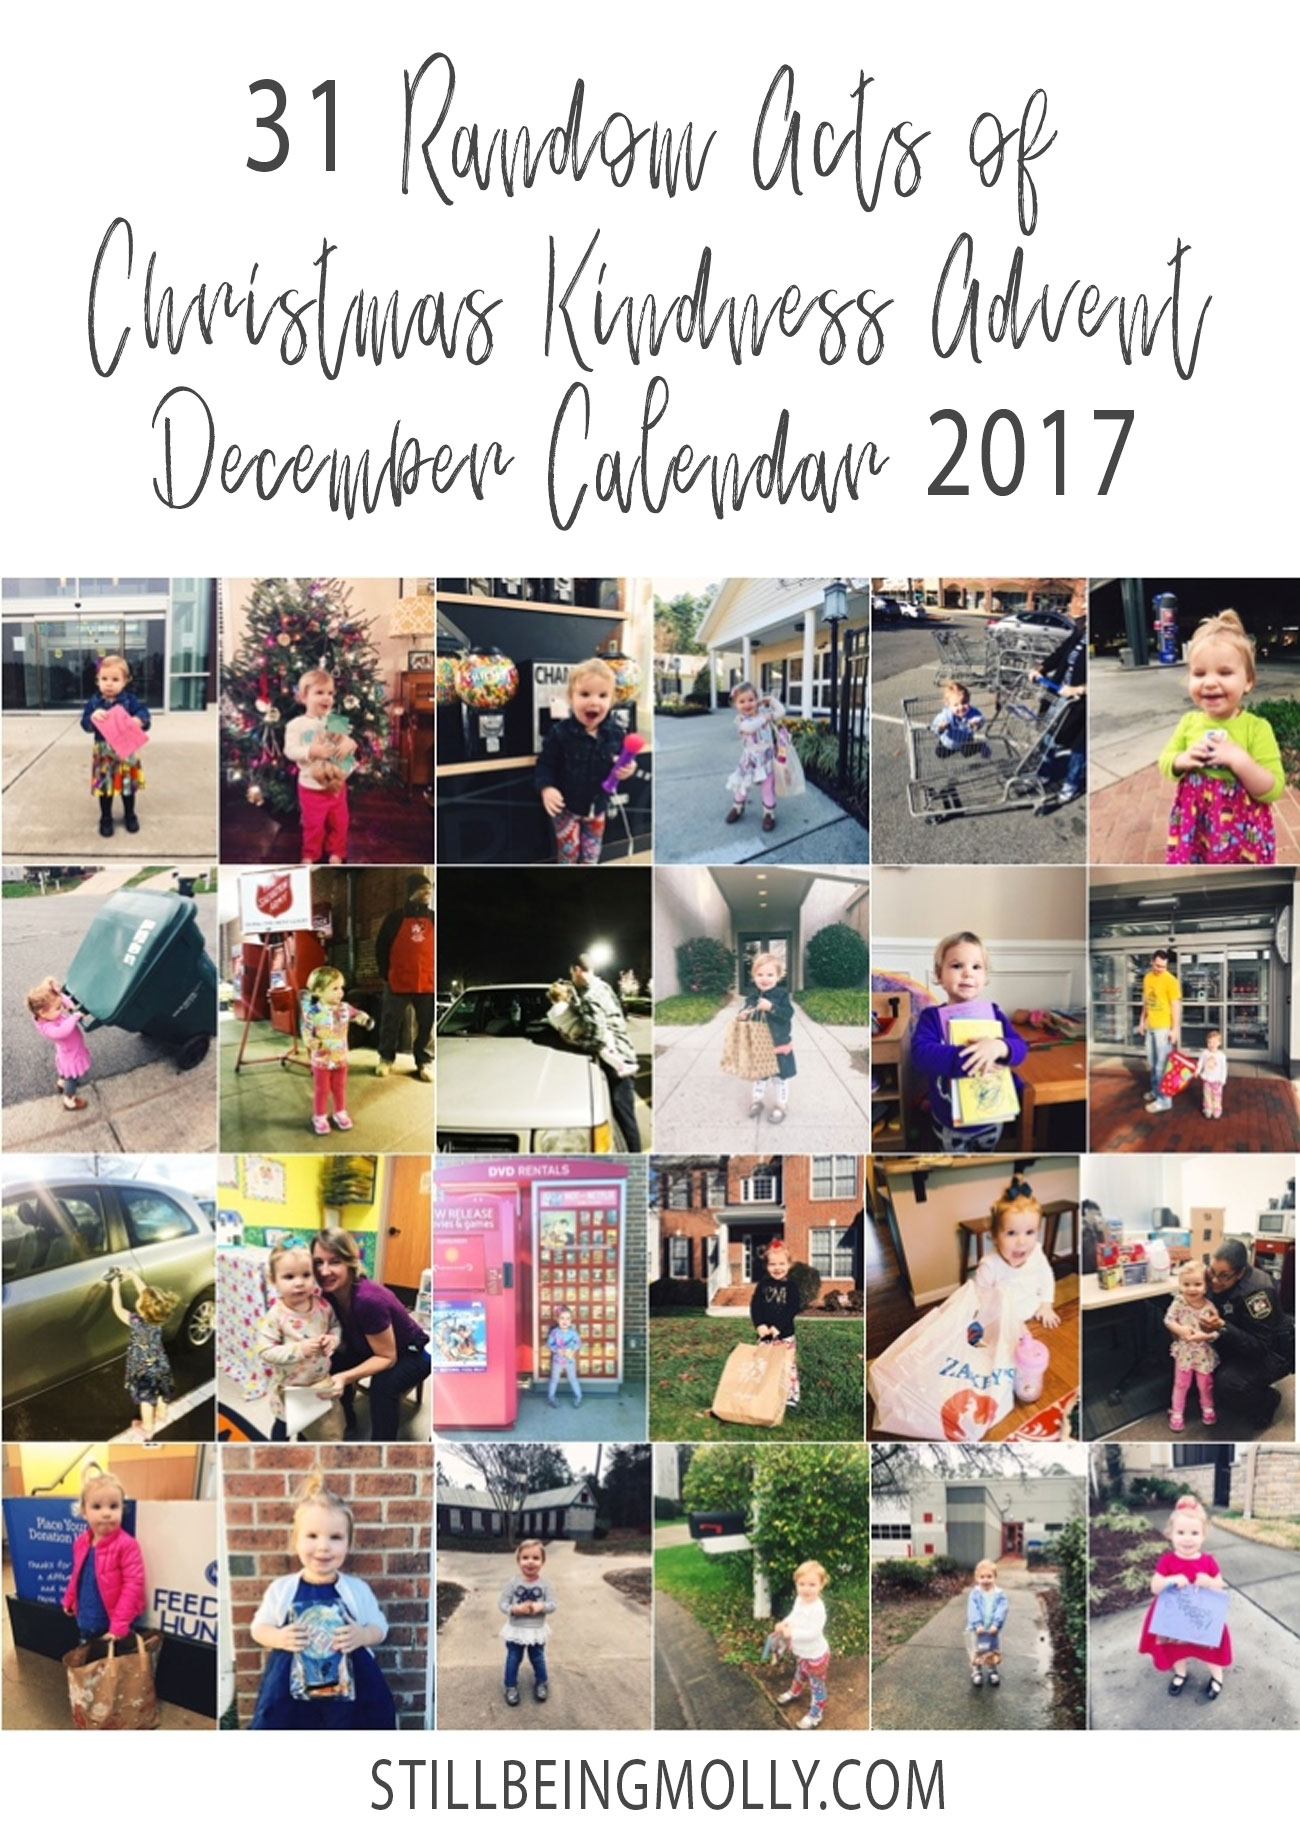 Join Us for the 2017 31 Random Acts of Kindness Christmas Advent - Join Us for the 2017 31 Random Acts of Kindness Christmas Advent by North Carolina lifestyle blogger Still Being Molly